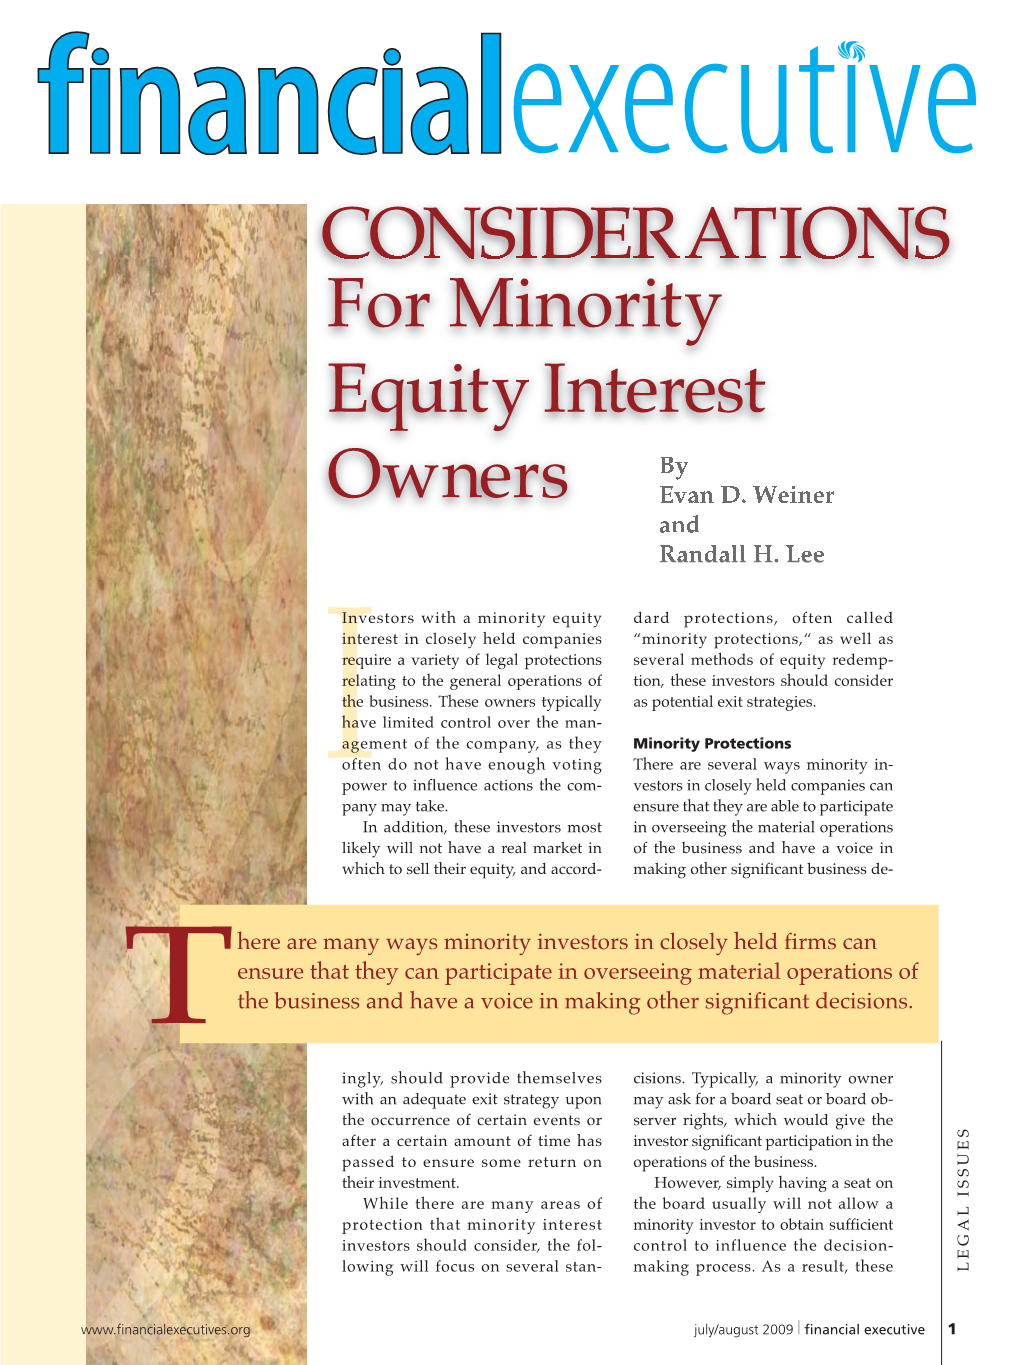 Considerations for Minority Equity Interest Owners